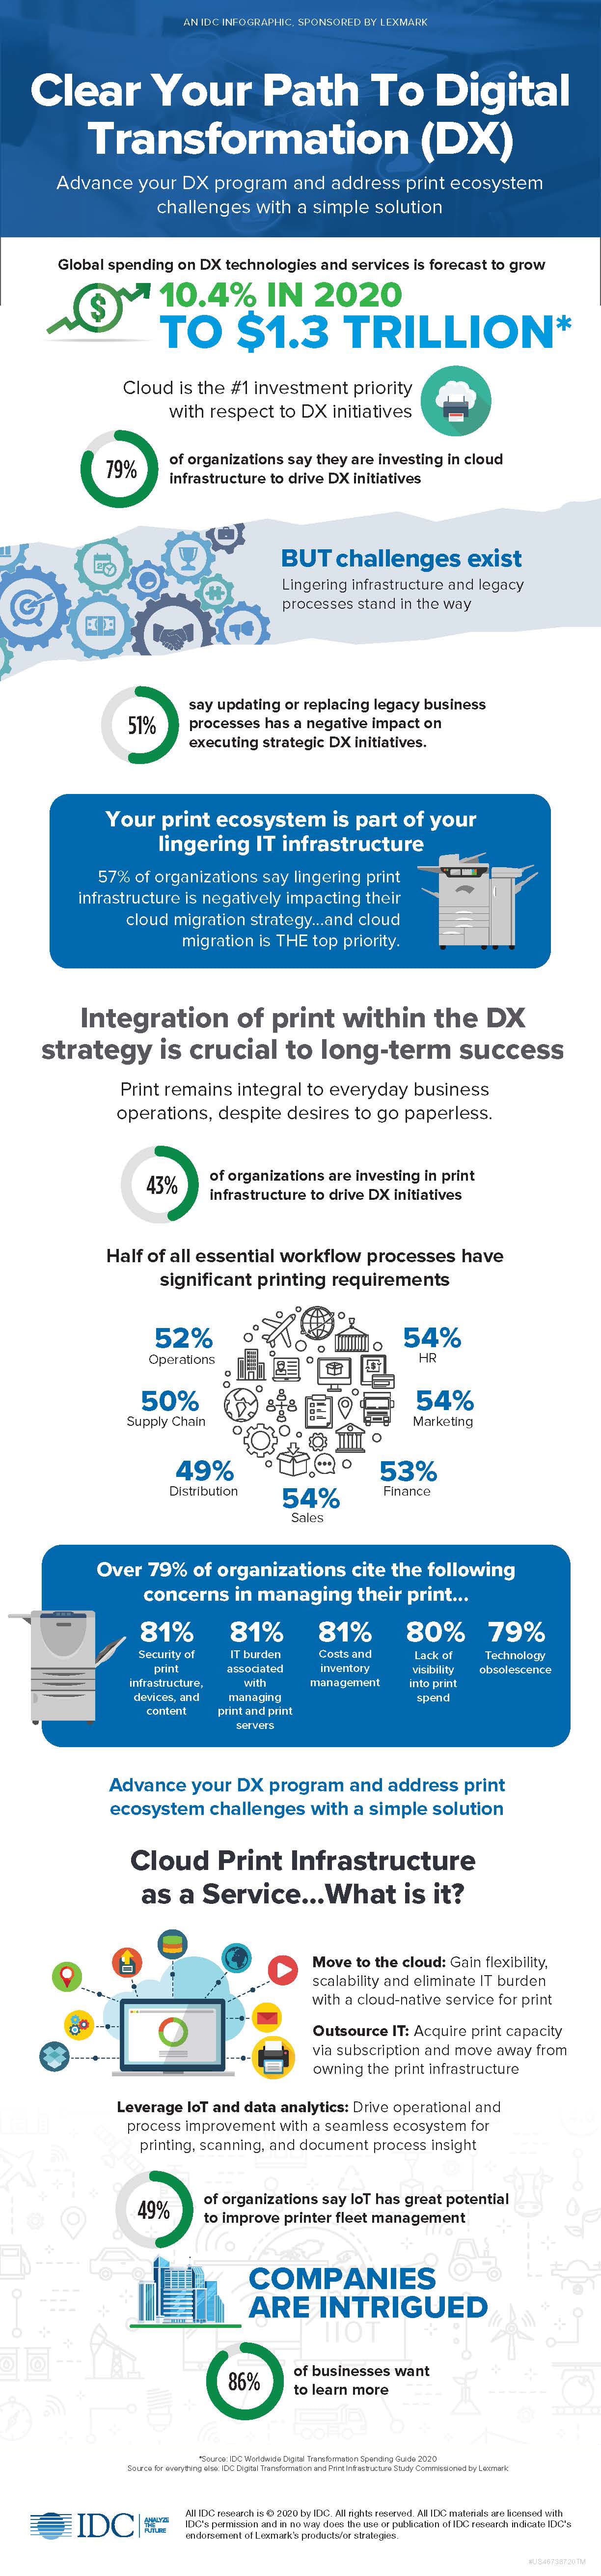 Lexmark and IDC Infographic